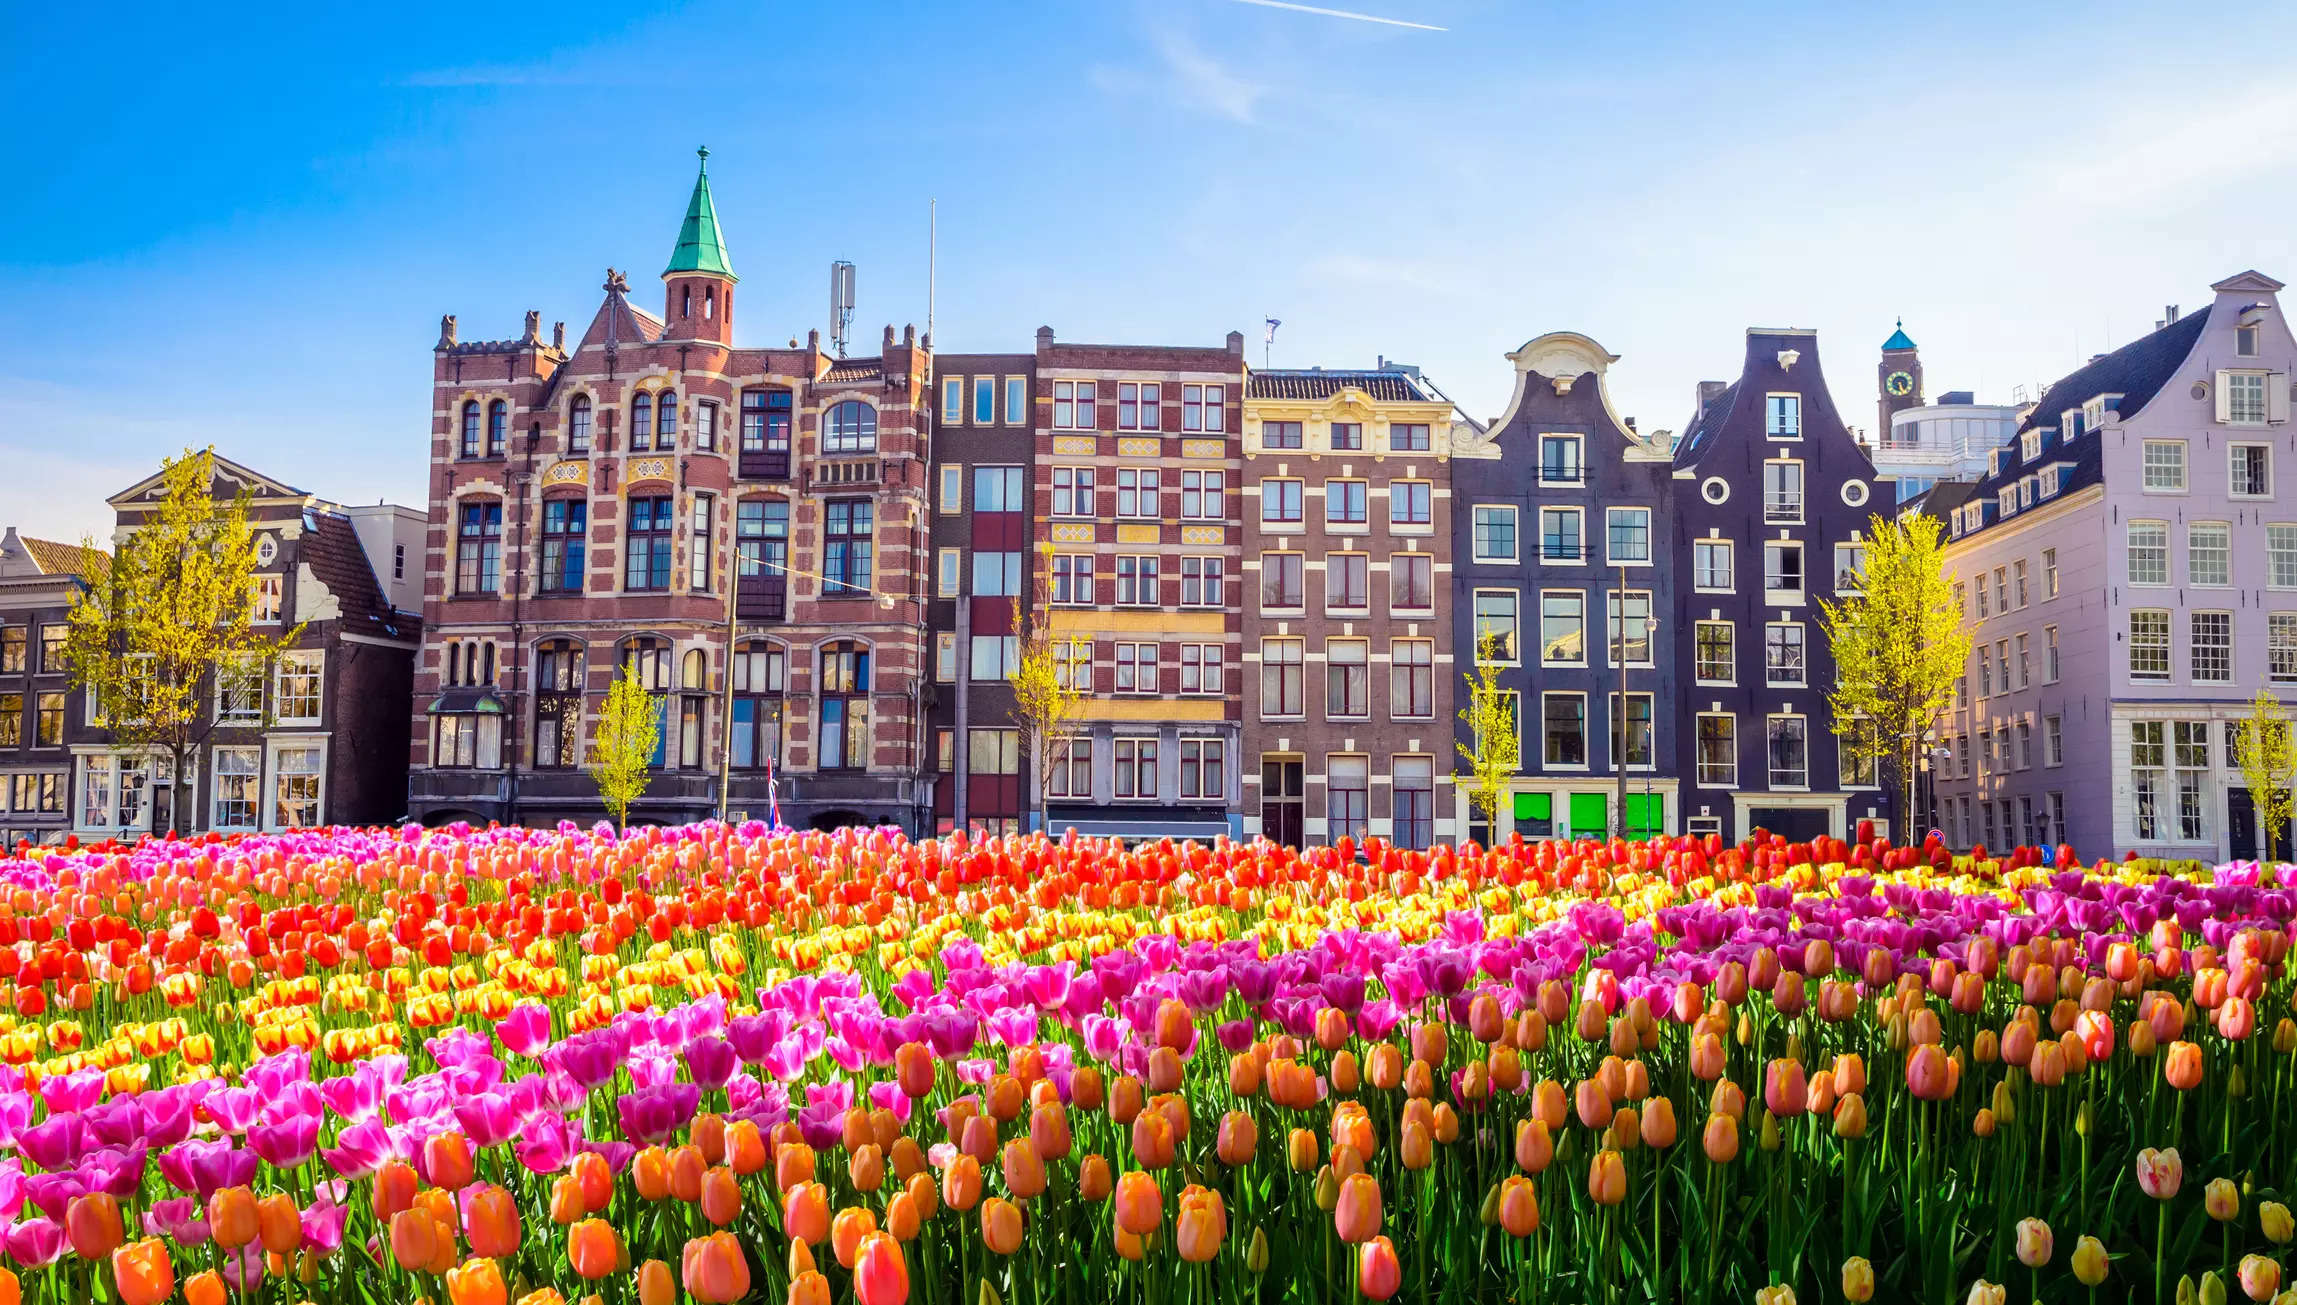 You can win a free trip to the Netherlands if you act fast! Check how